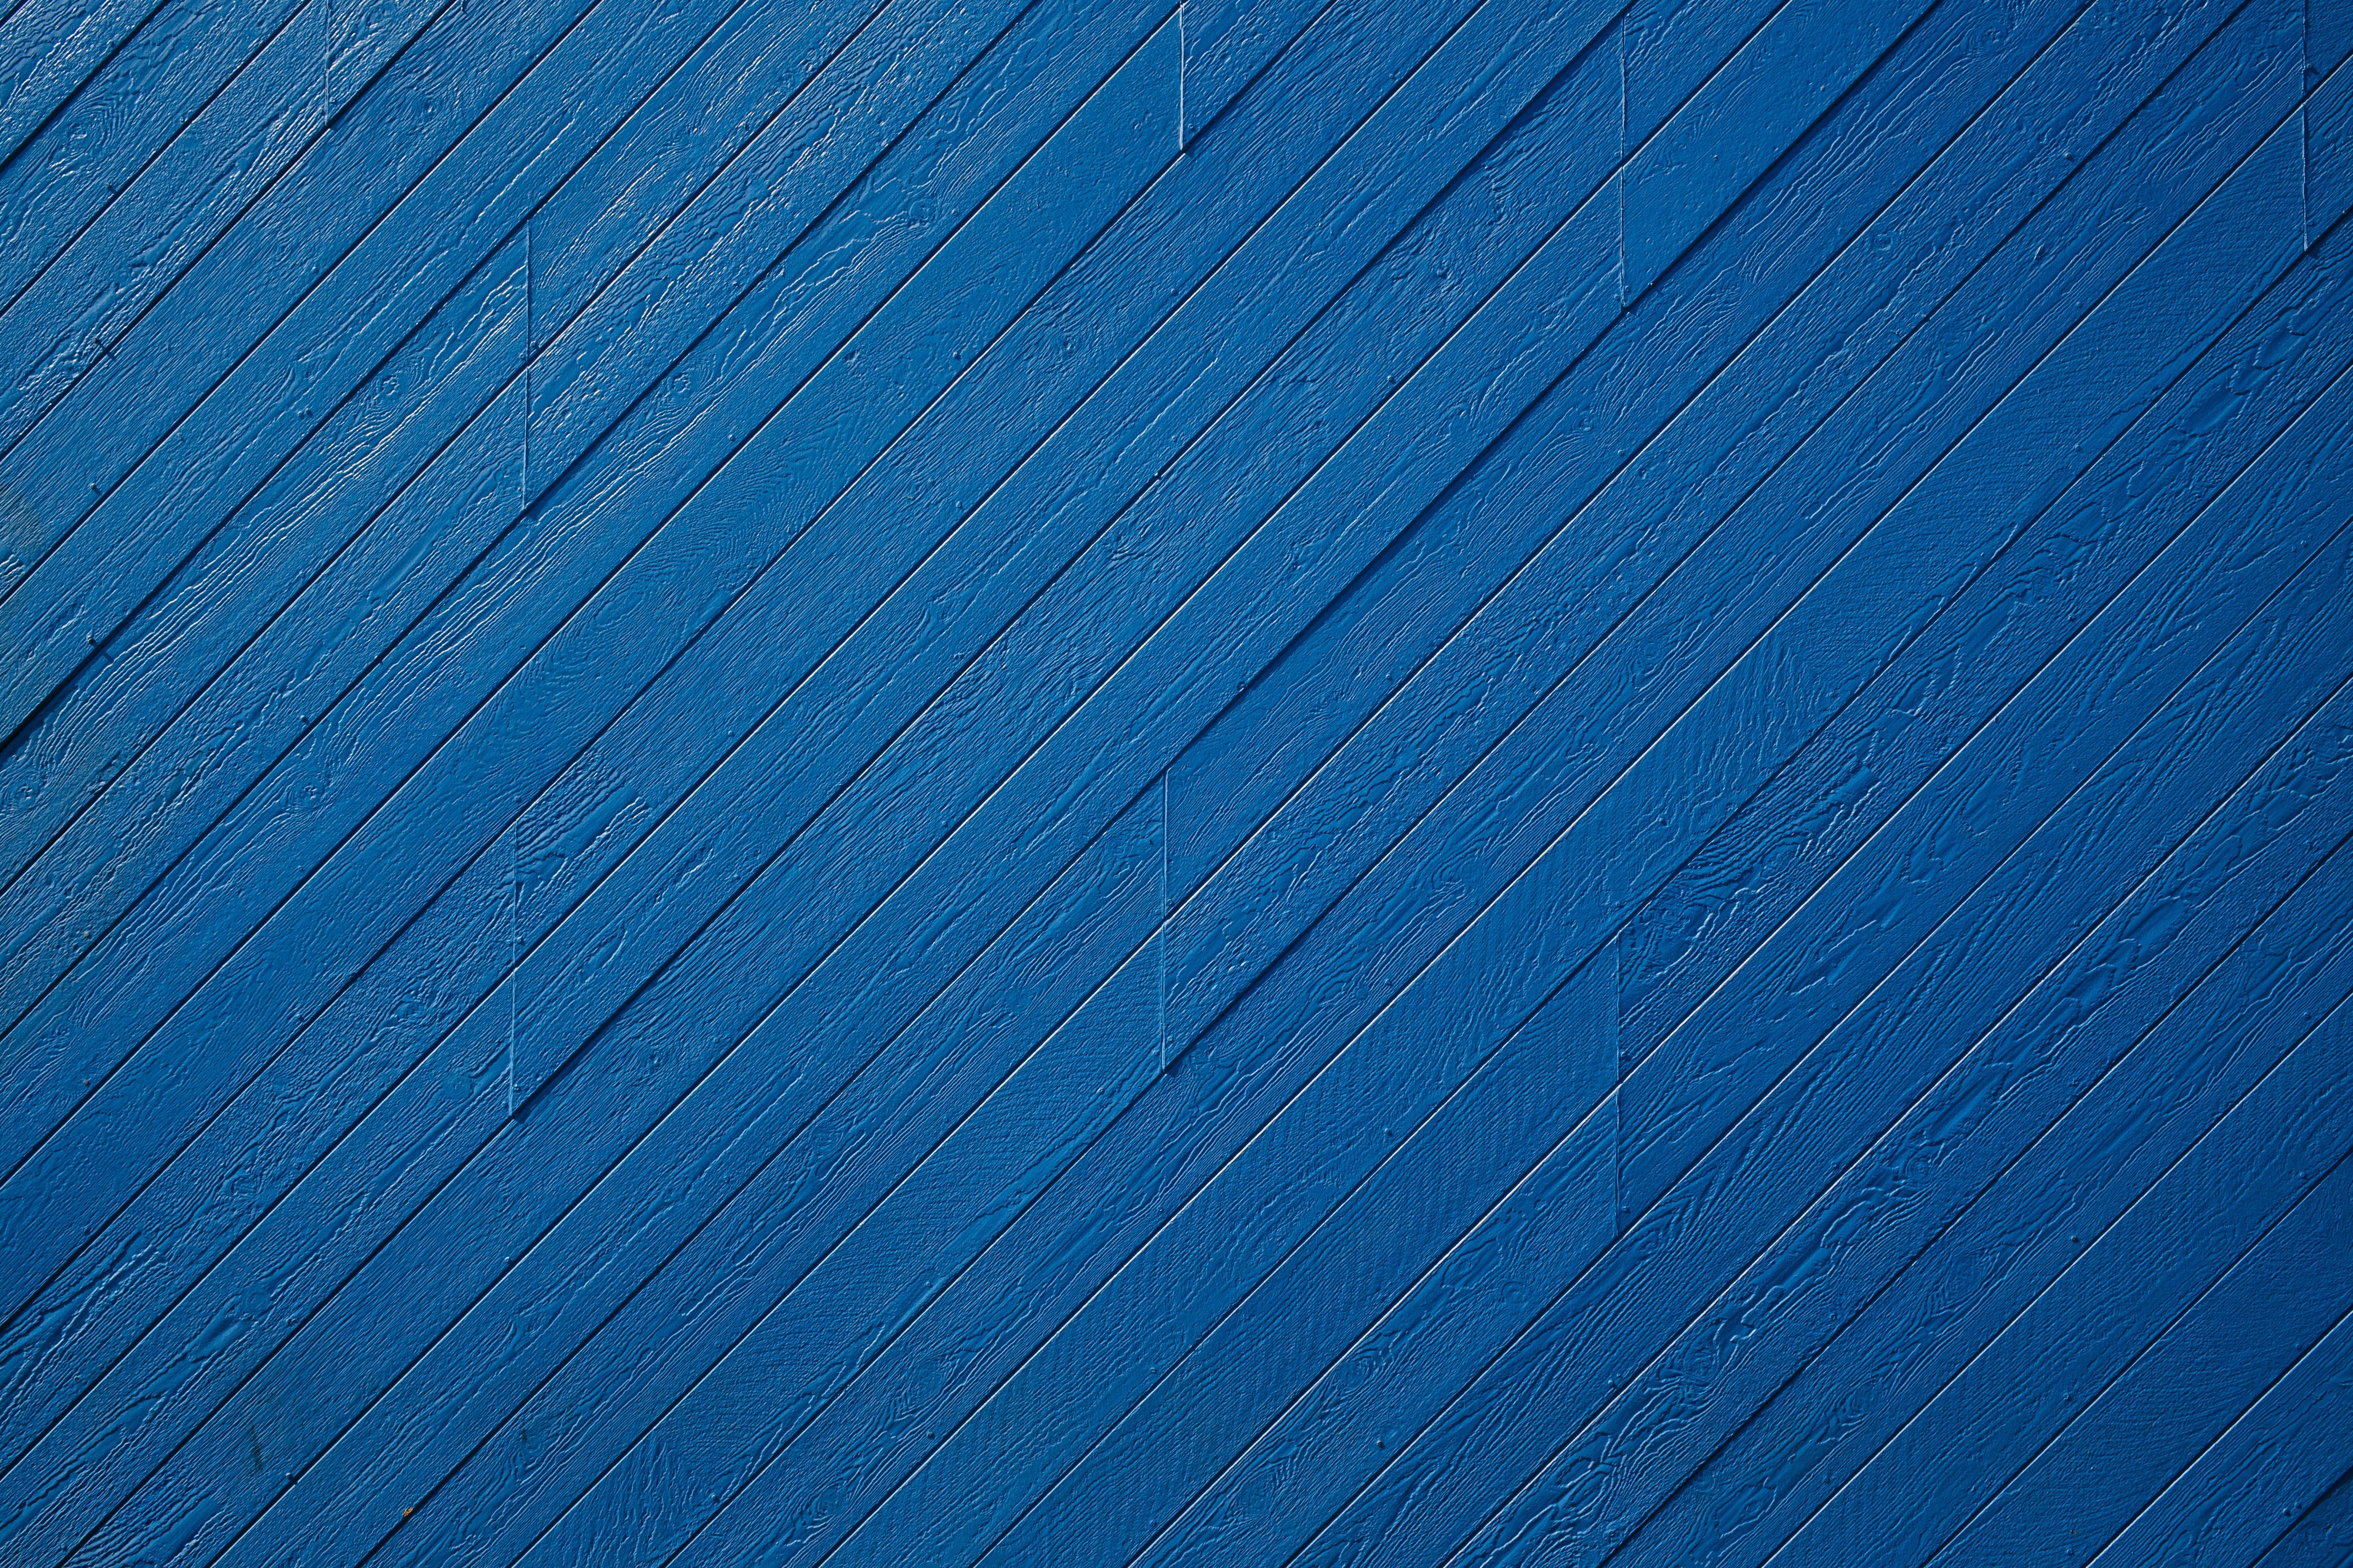 Full HD textures, obliquely, blue, wood, wooden, texture, paint, wall